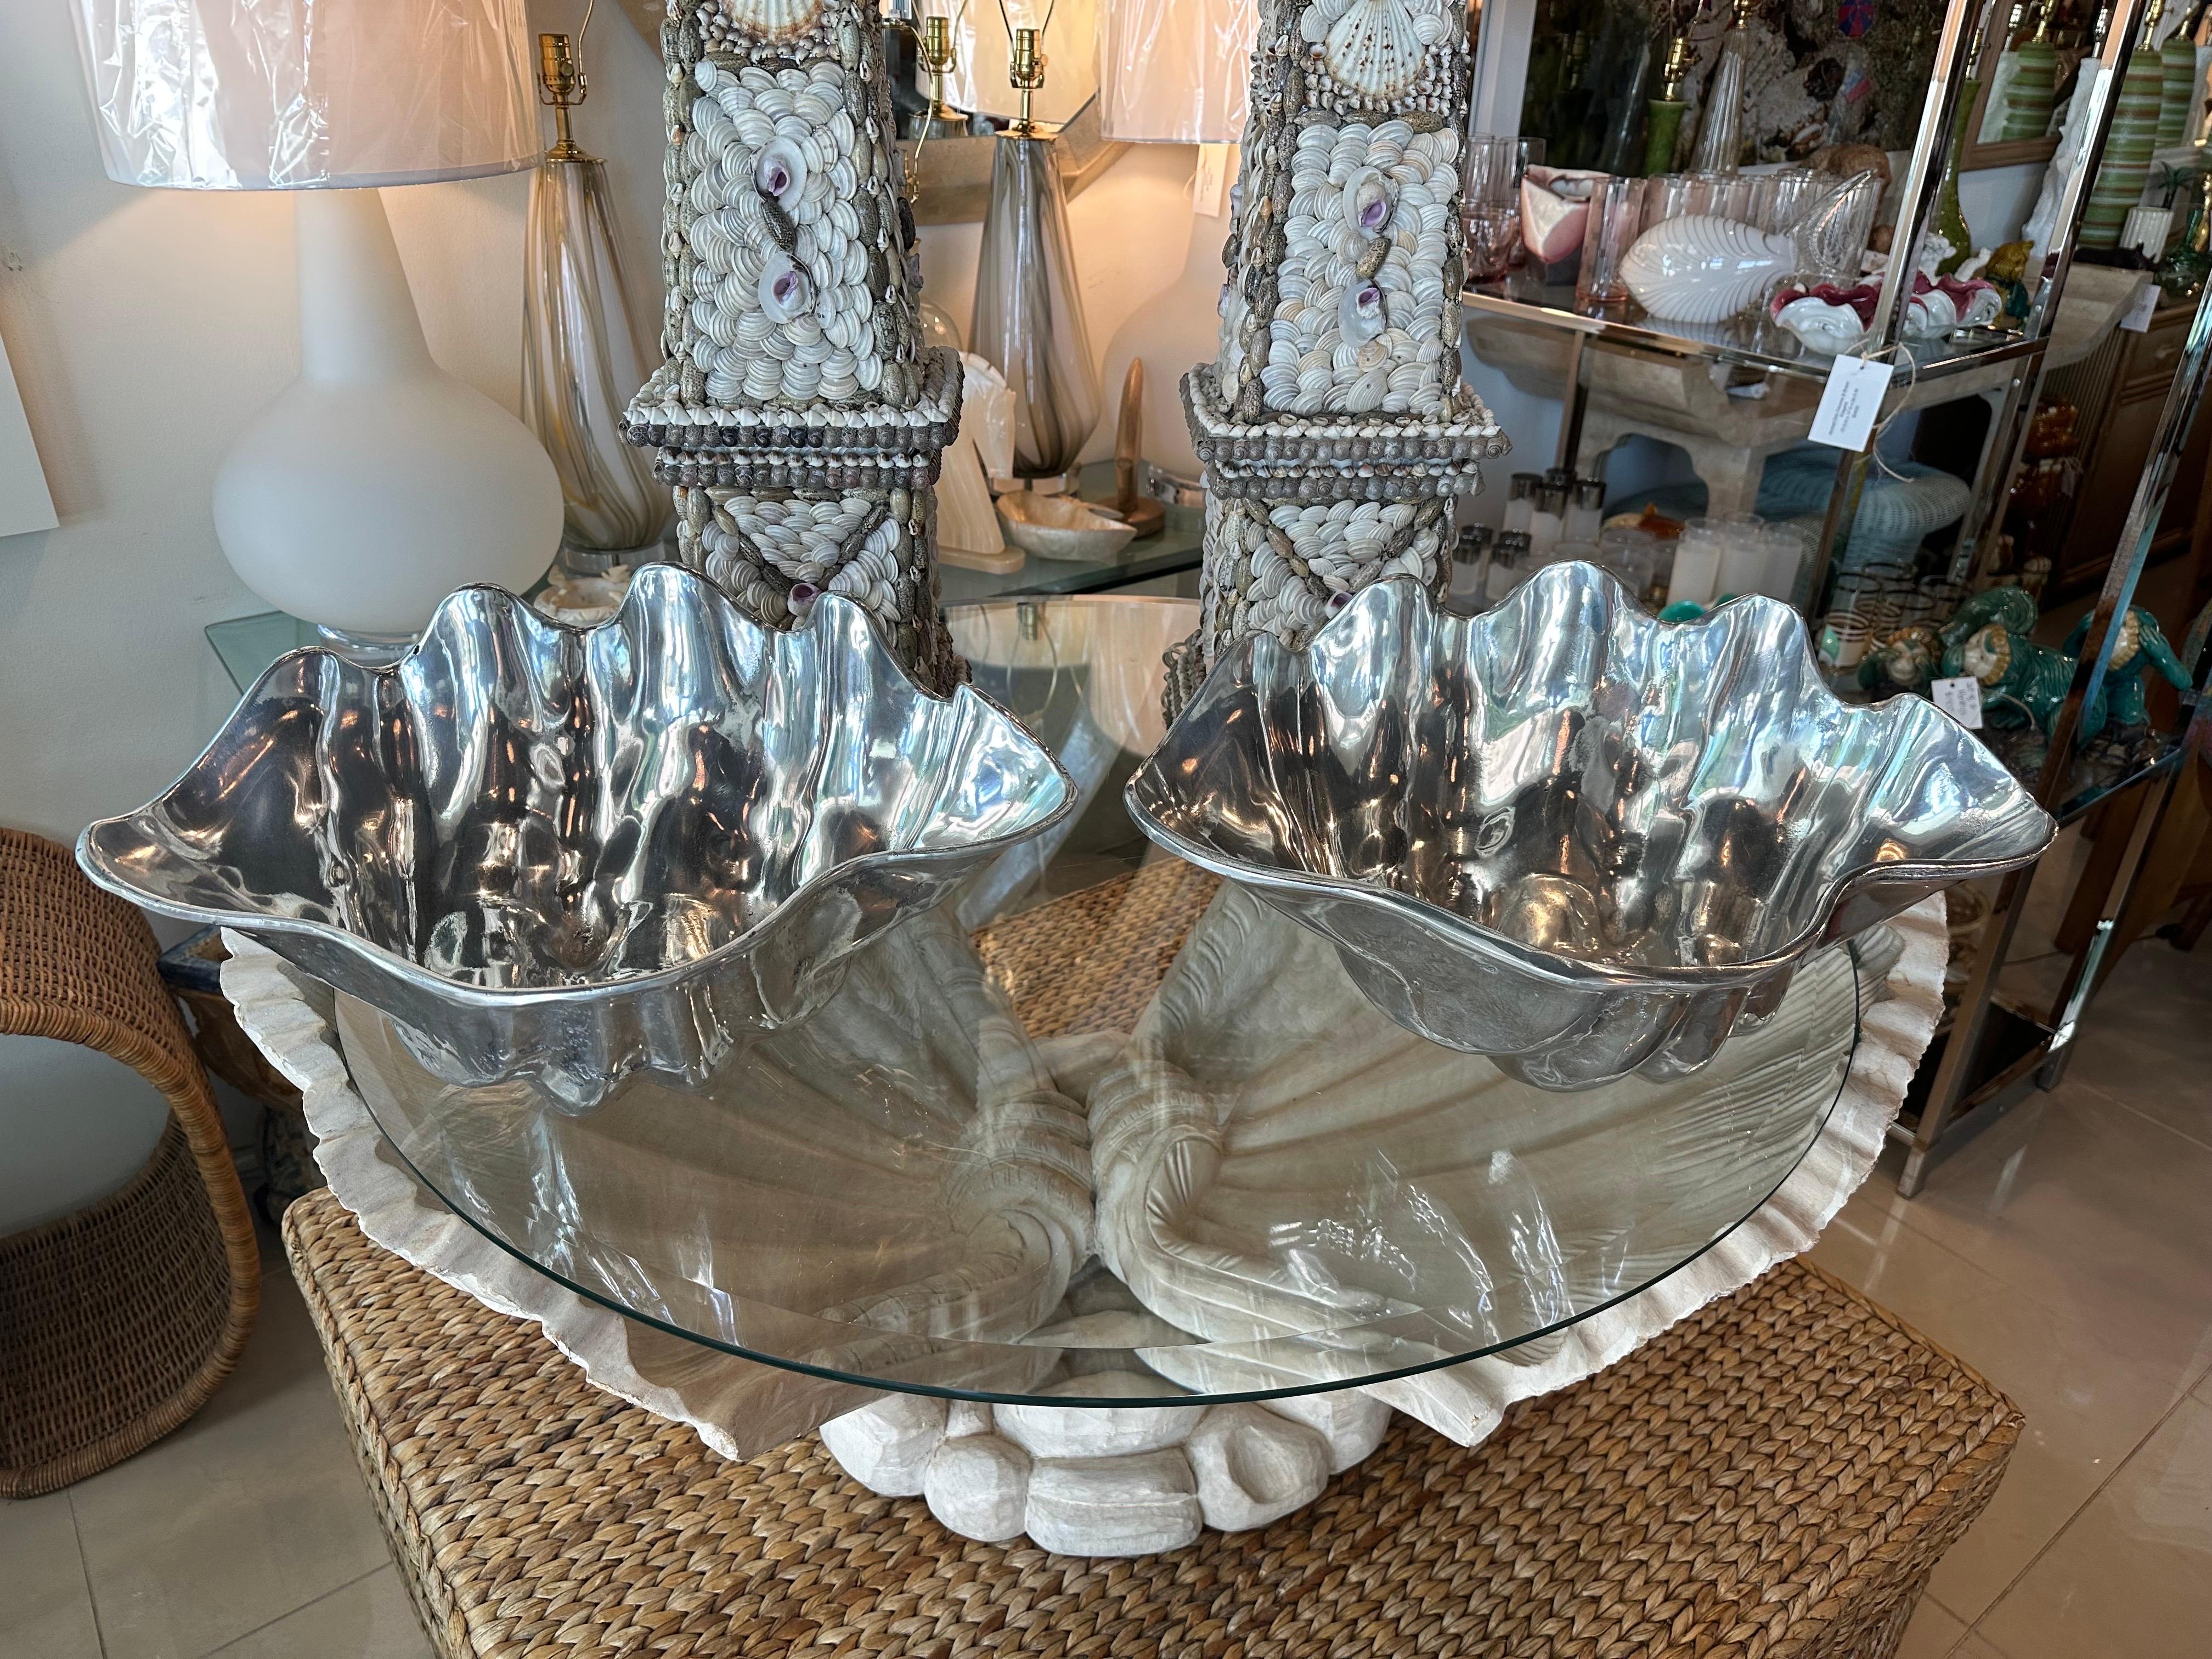 Lovely pair of vintage footed metal scalloped clam shell clamshell vases urns pots planters vessels. In the style of Arthur Court. These can be used for plants, hand towels, shells, as an ice bucket, etc. Dimensions: 18 W x 13 D x 8 H